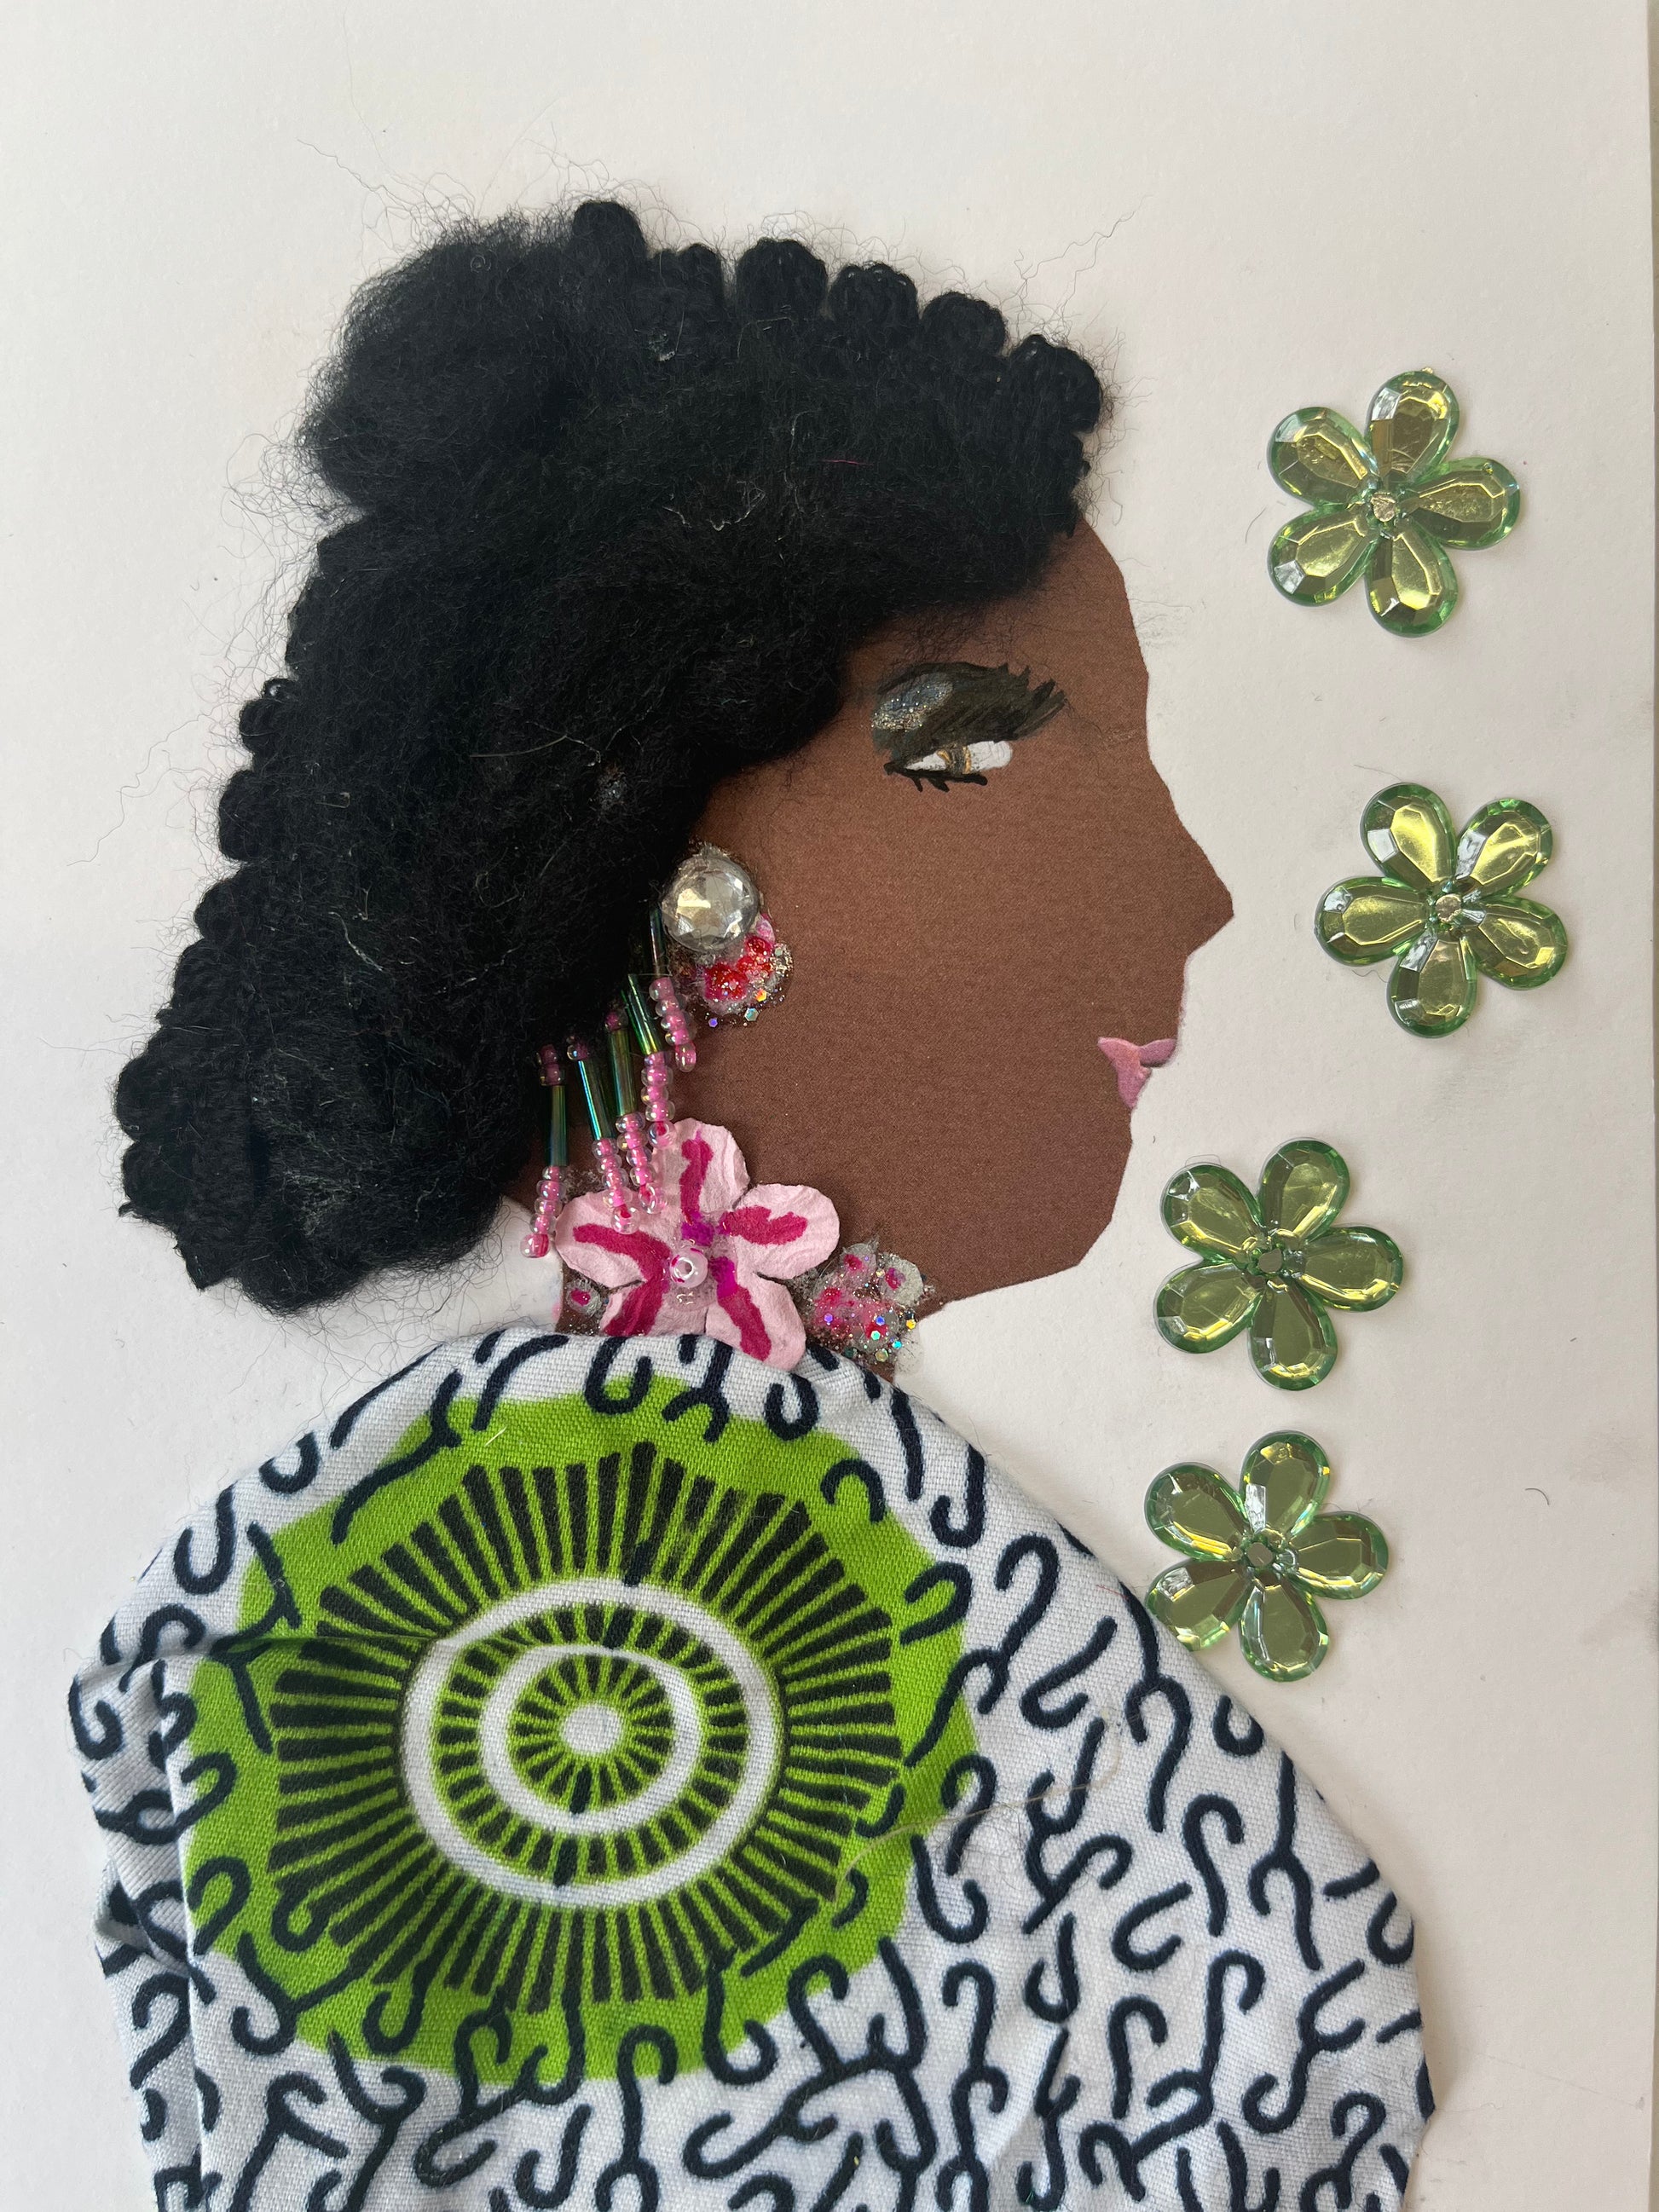 This card is of a woman given the name Amy. Amy wears a black, white, and green patterned blouse, a necklace with a pink flower on it, and she has medium length black hair. To her right, there are four green flower crystals. 